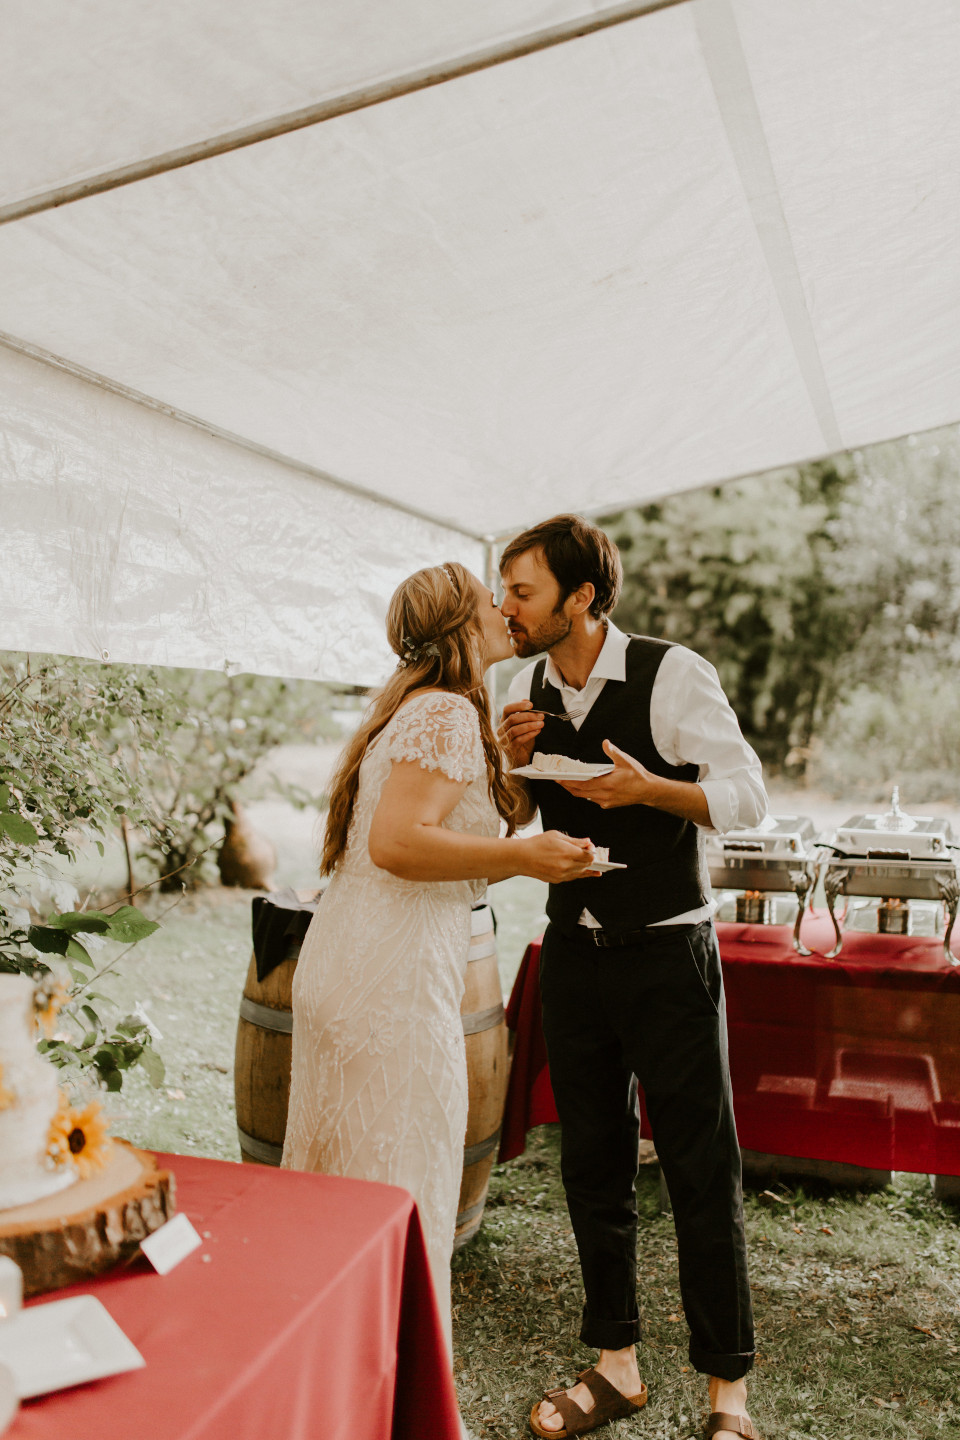 Hannah and Dan kiss after cutting the cake in Corvallis, Oregon. Intimate wedding photography in Corvallis Oregon by Sienna Plus Josh.